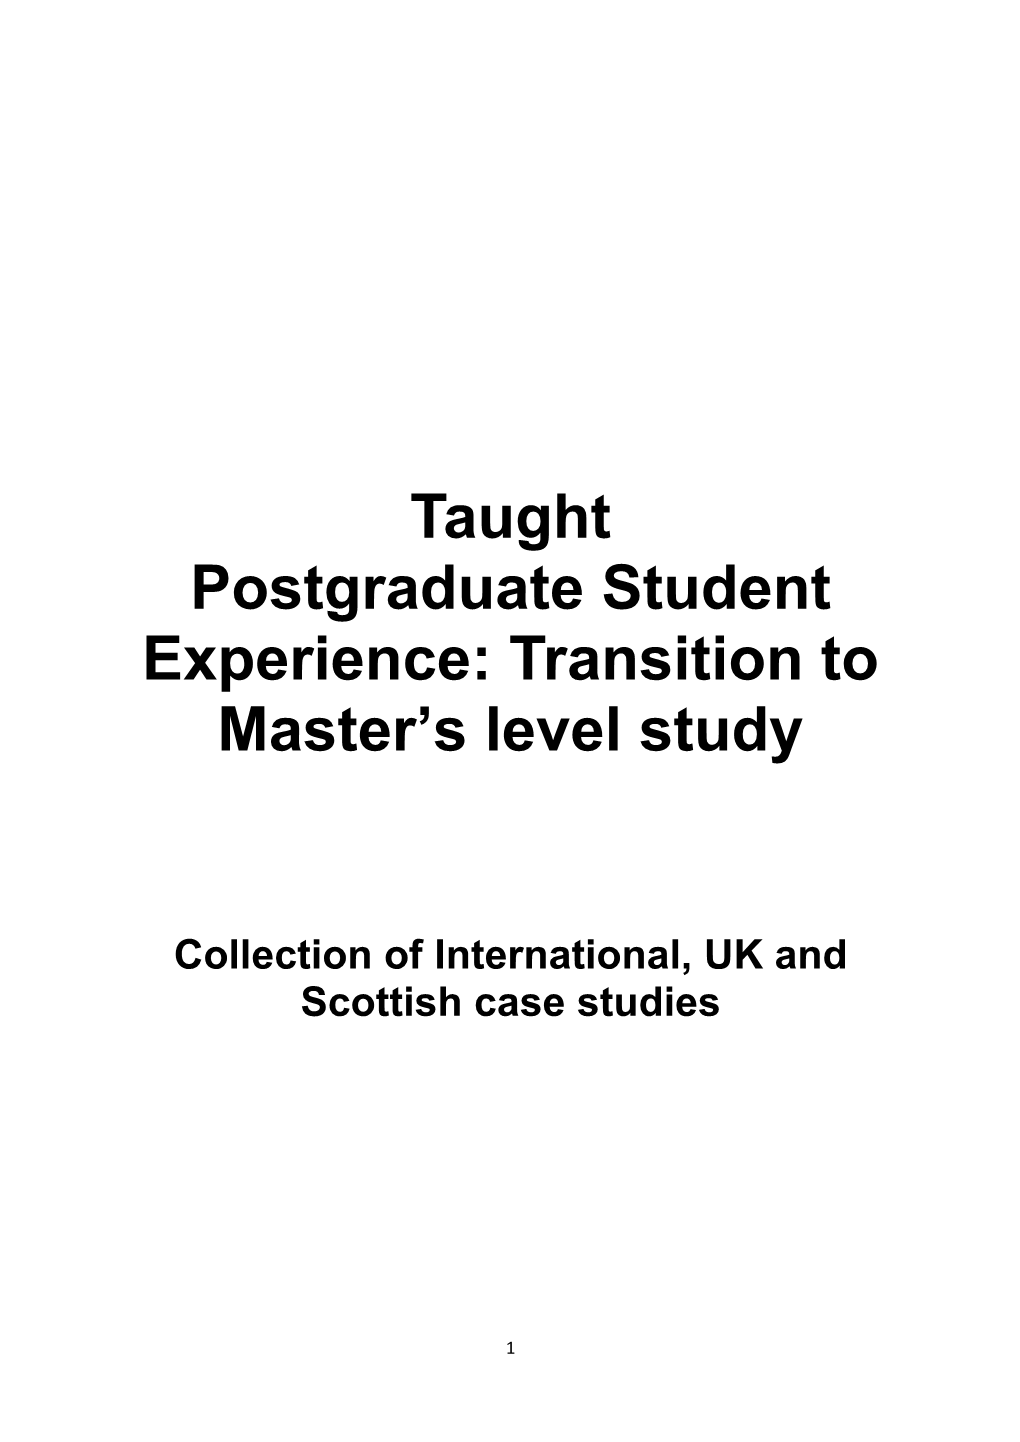 Transition to Master's Level Study